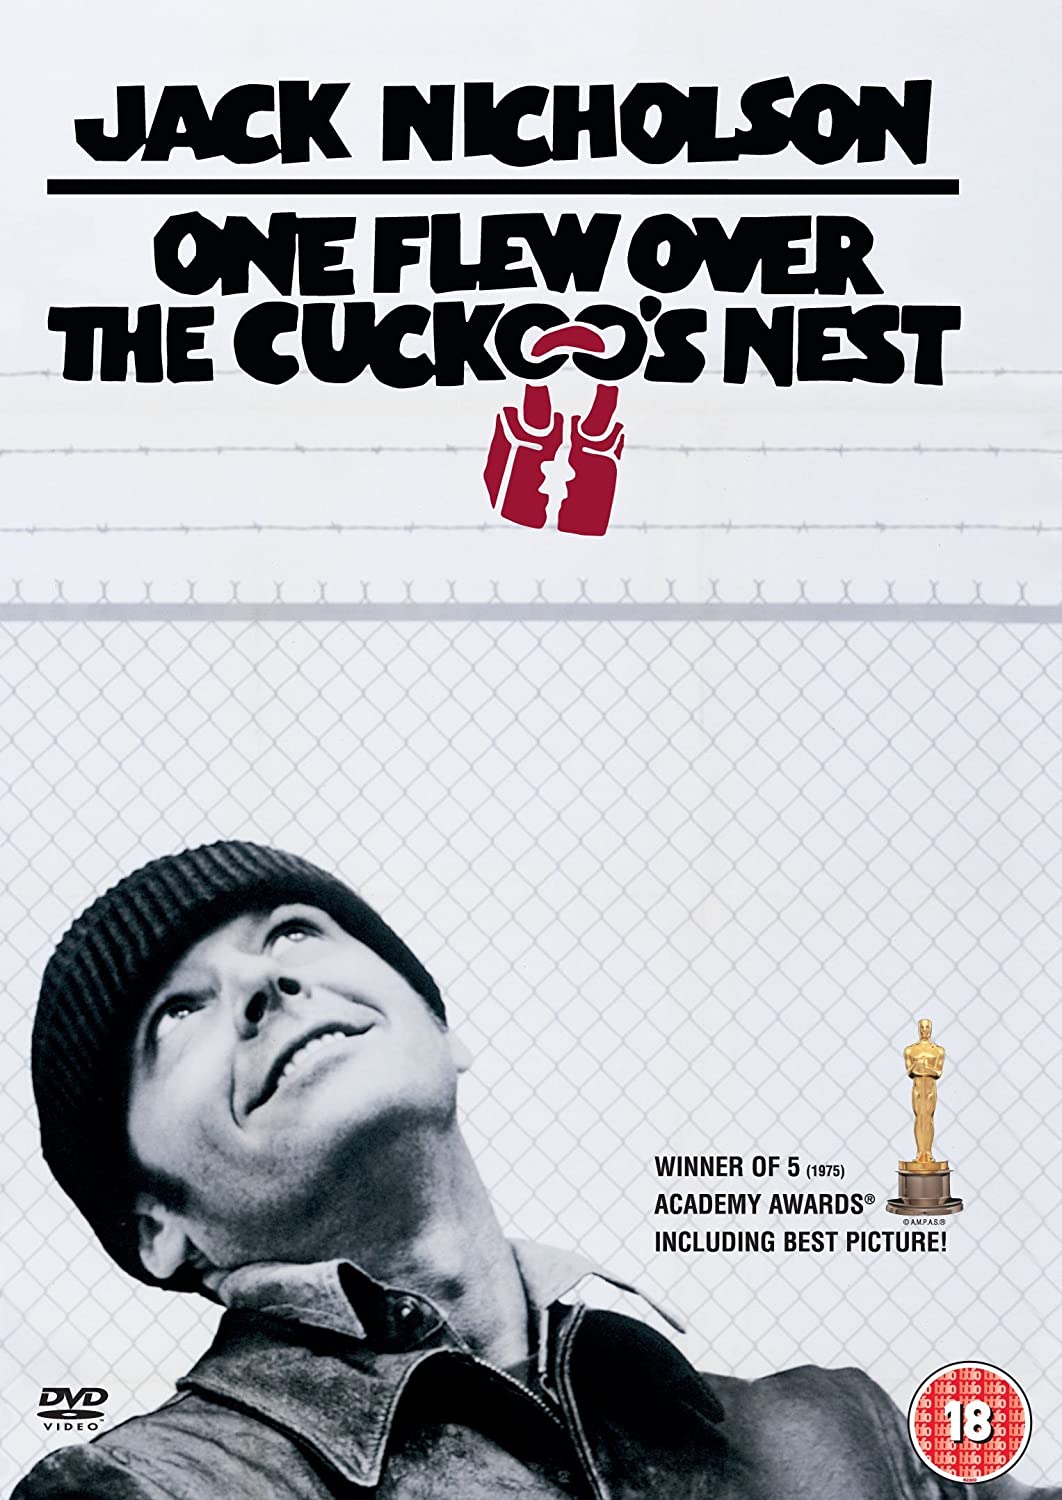 ONE FLEW OVER THE CUCKOOS NES [DVD] [1998] - [DVD]